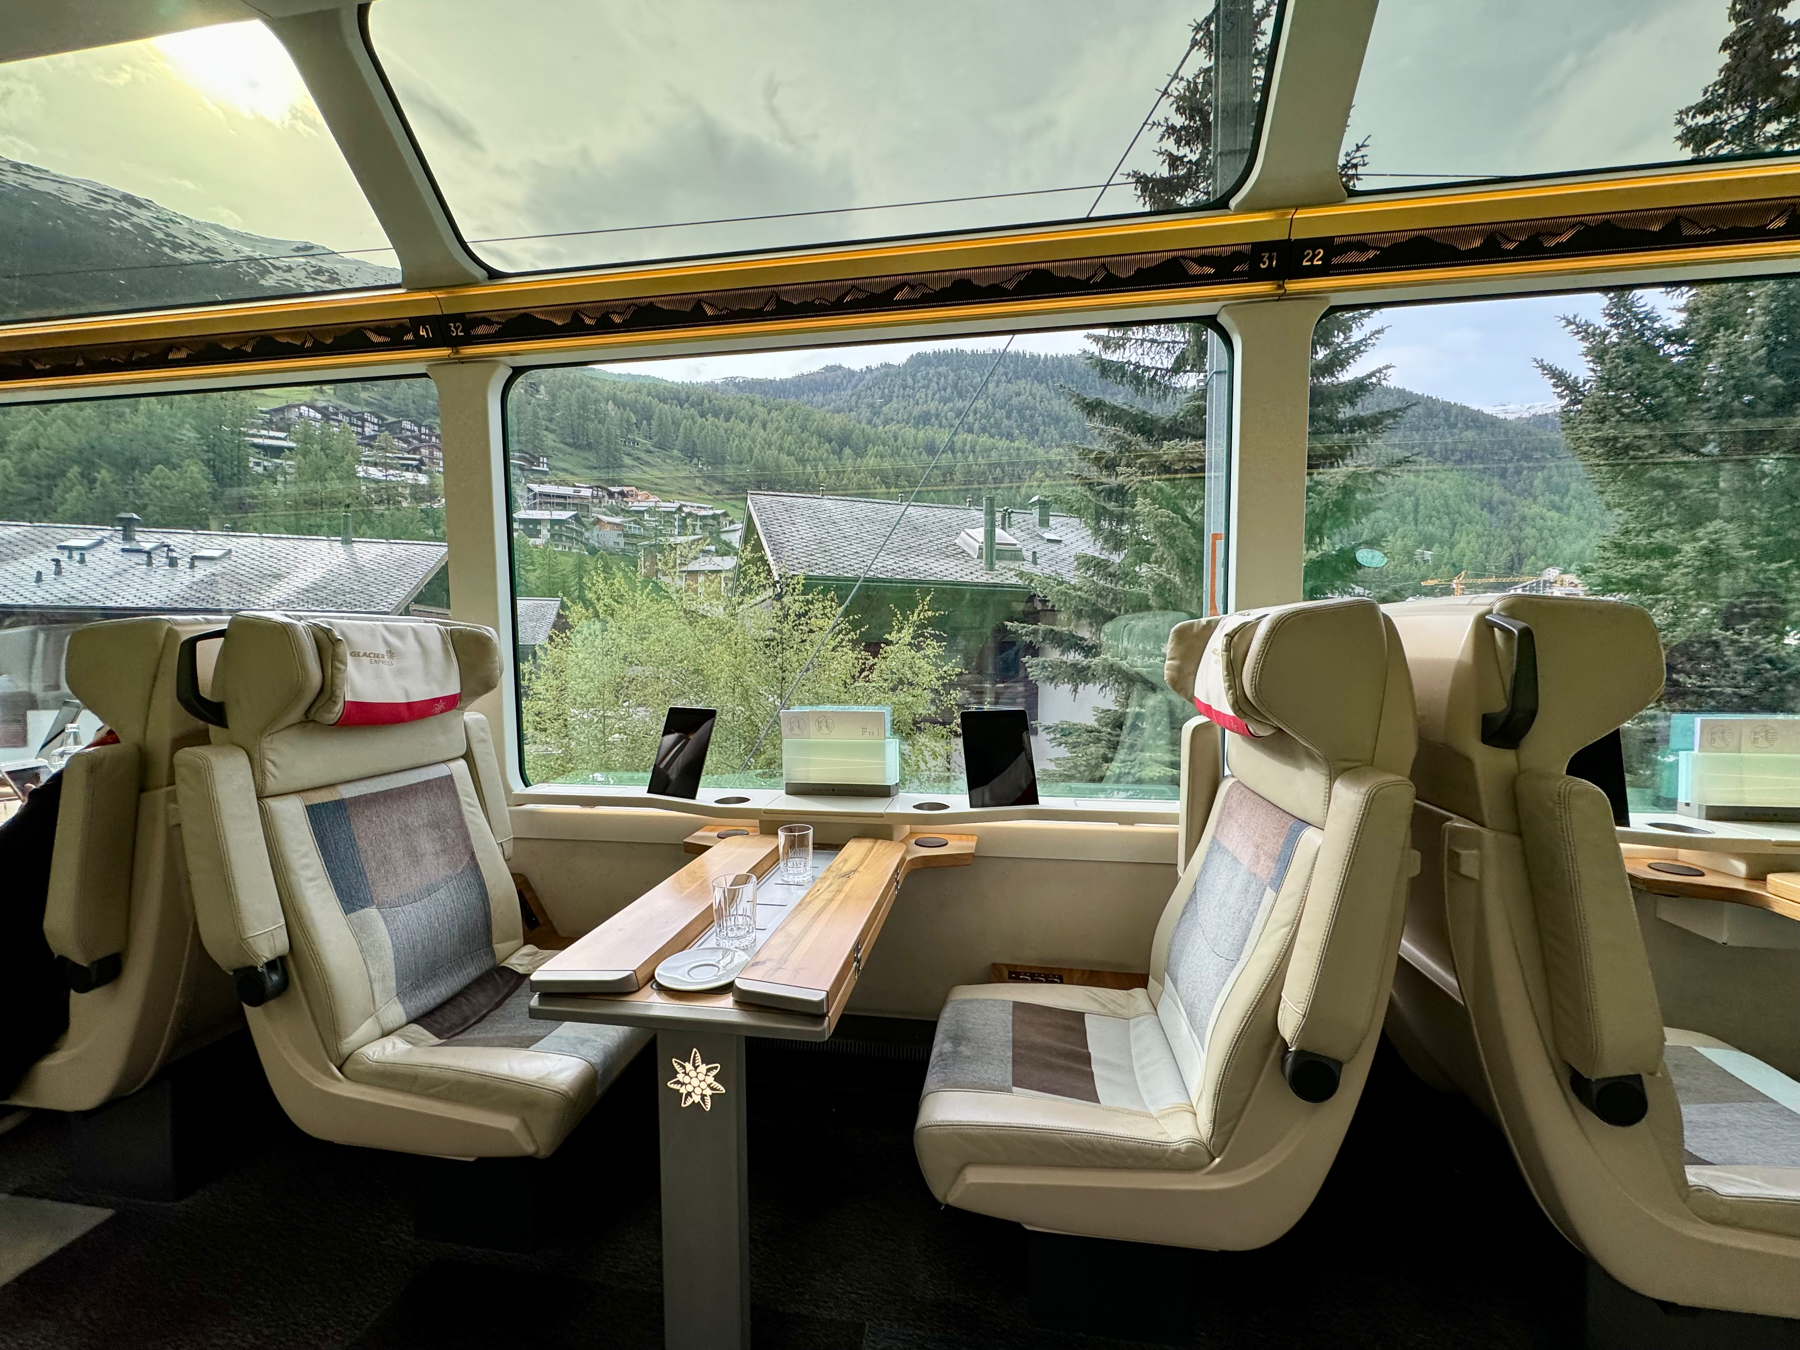 Interior of a luxury passenger train with spacious seating, large panoramic windows, and a scenic view of green, forested hills and a small town.